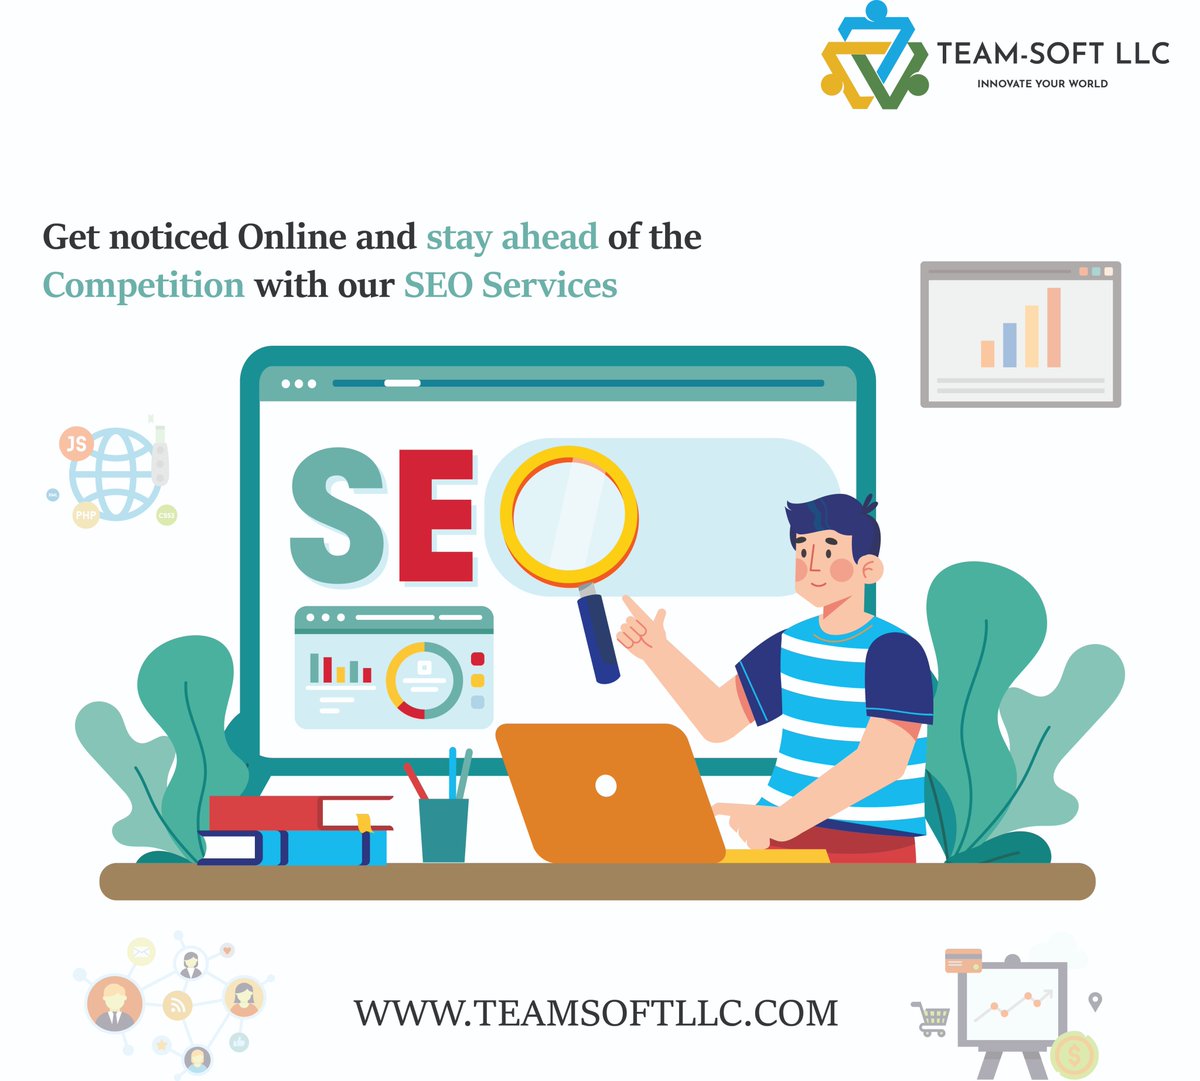 Boost your online presence and outshine the competition with our expert SEO services. 

#SEOexperts #OnlinePresence #BrandVisibility #SEOservices #MarketingSuccess #SEOstrategy #DigitalSuccess #BoostTraffic #SEOconsulting #ElevateYourBrand